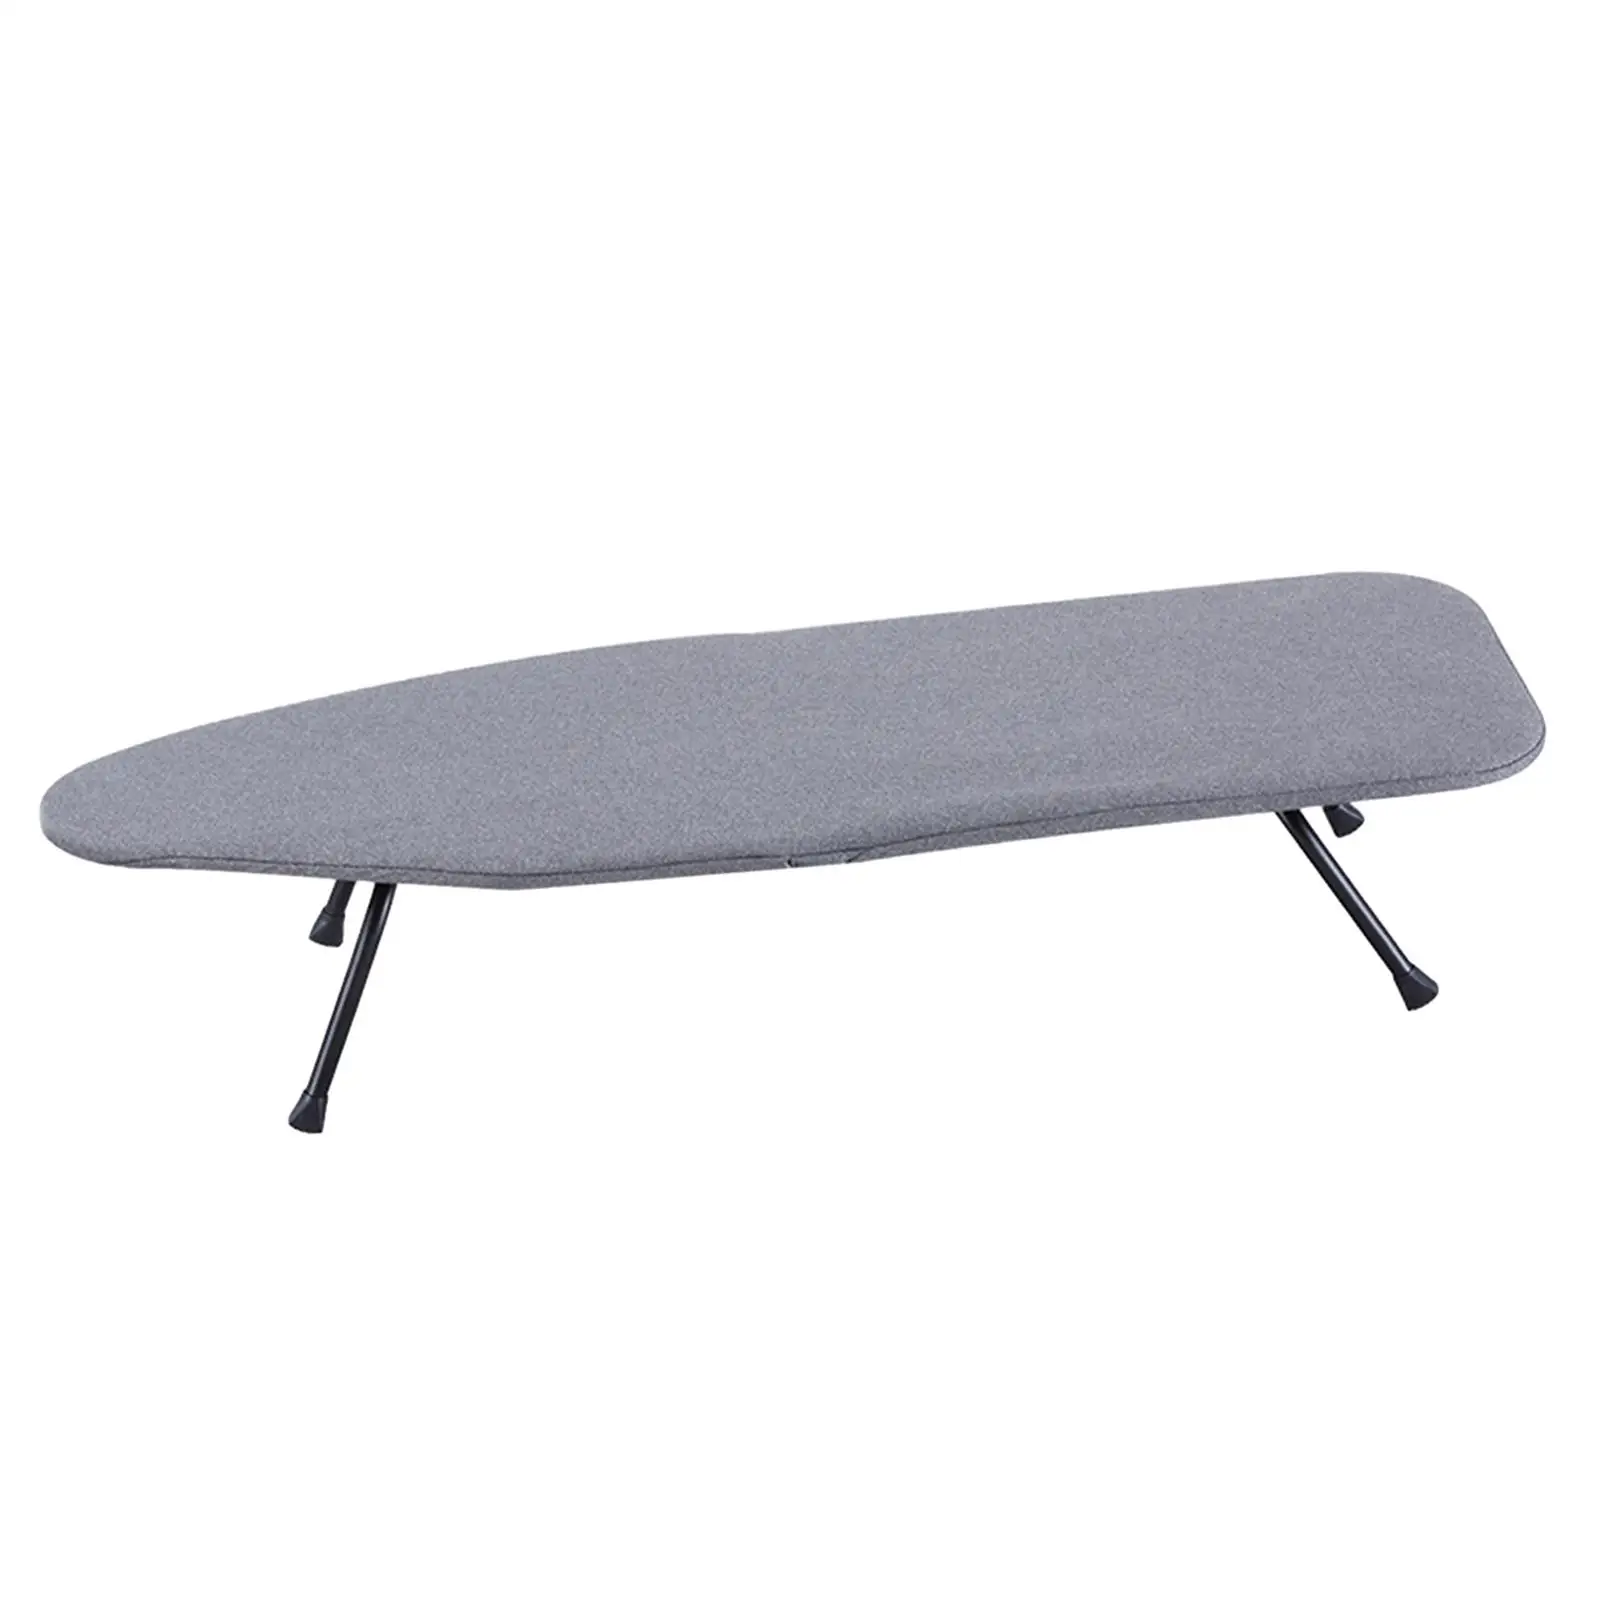 Tabletop Ironing Board Heavy Duty Ironing Table with Folding Legs Foldable Ironing Board for Household Dorm Sewing Craft Room